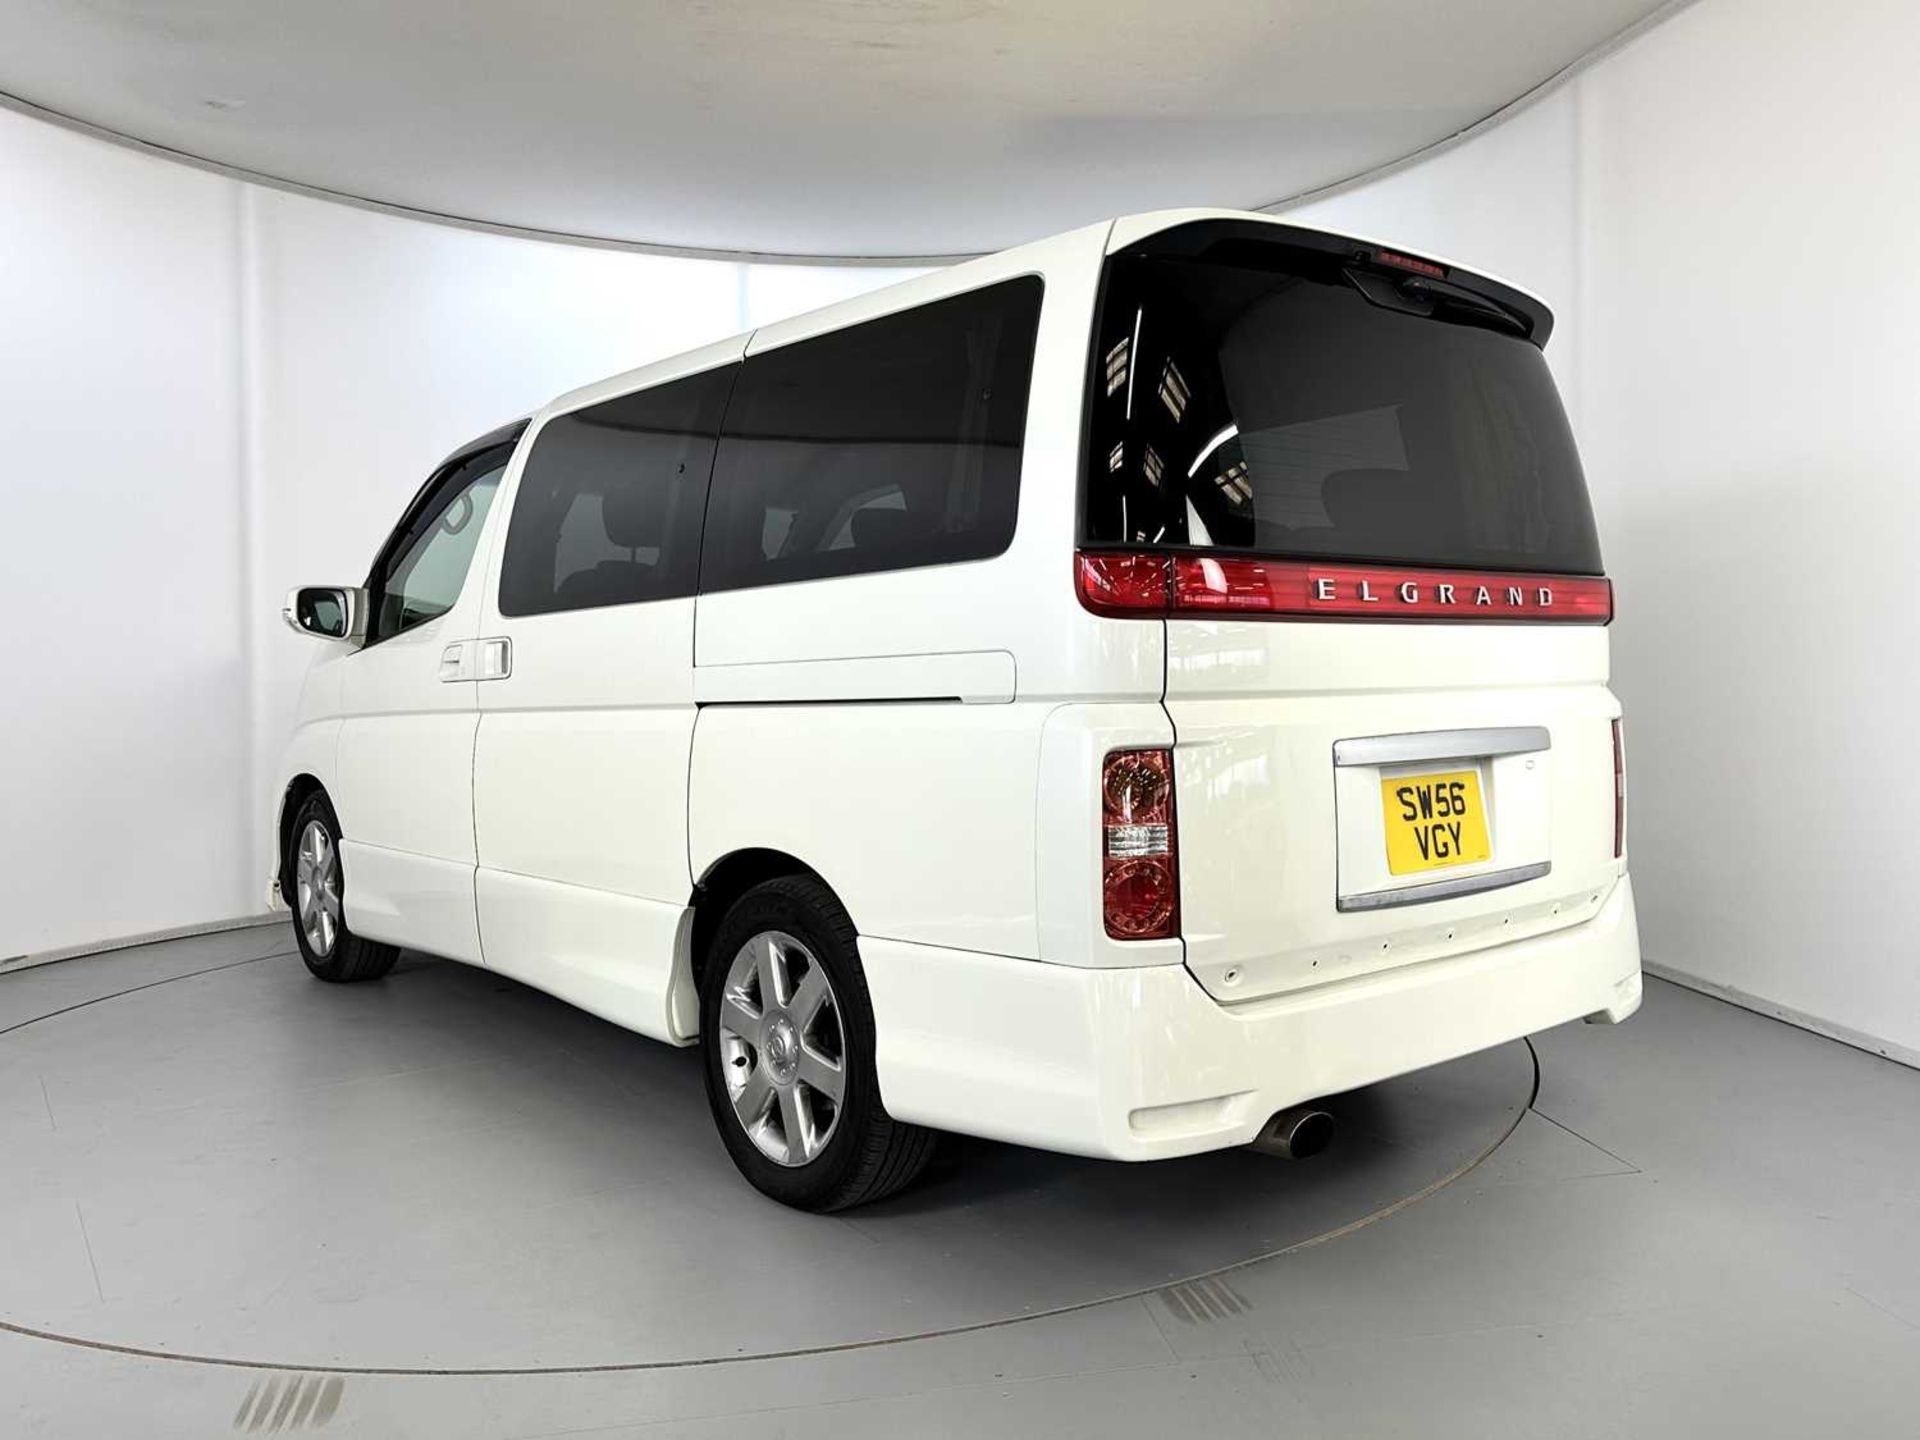 2007 Nissan Elgrand - Highway Star Edition 4WD - Image 7 of 39